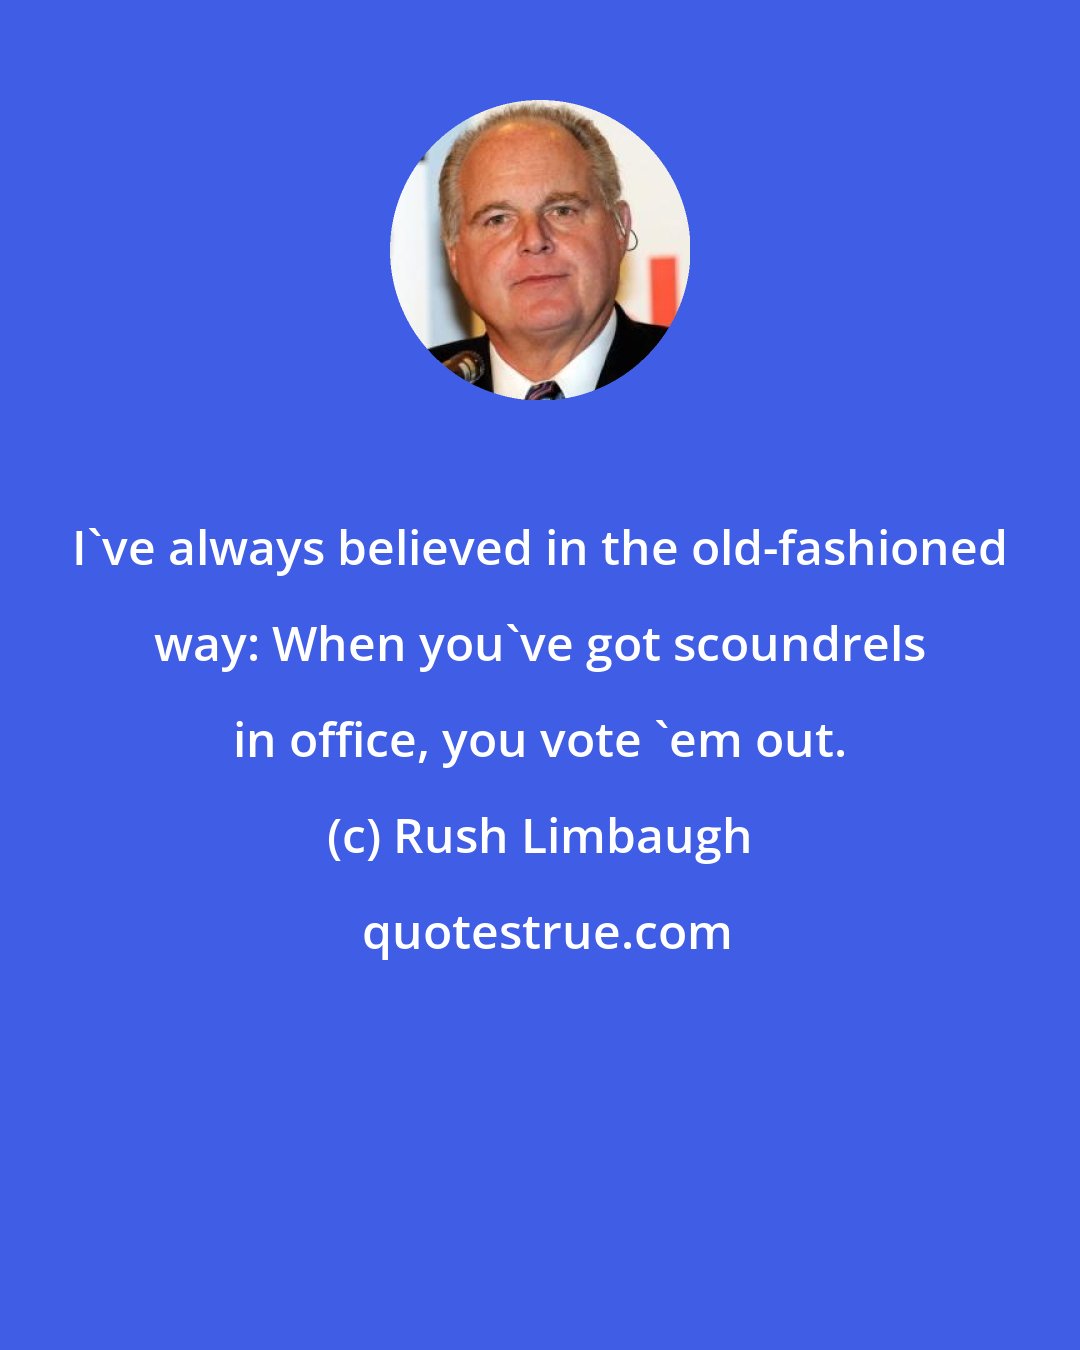 Rush Limbaugh: I've always believed in the old-fashioned way: When you've got scoundrels in office, you vote 'em out.